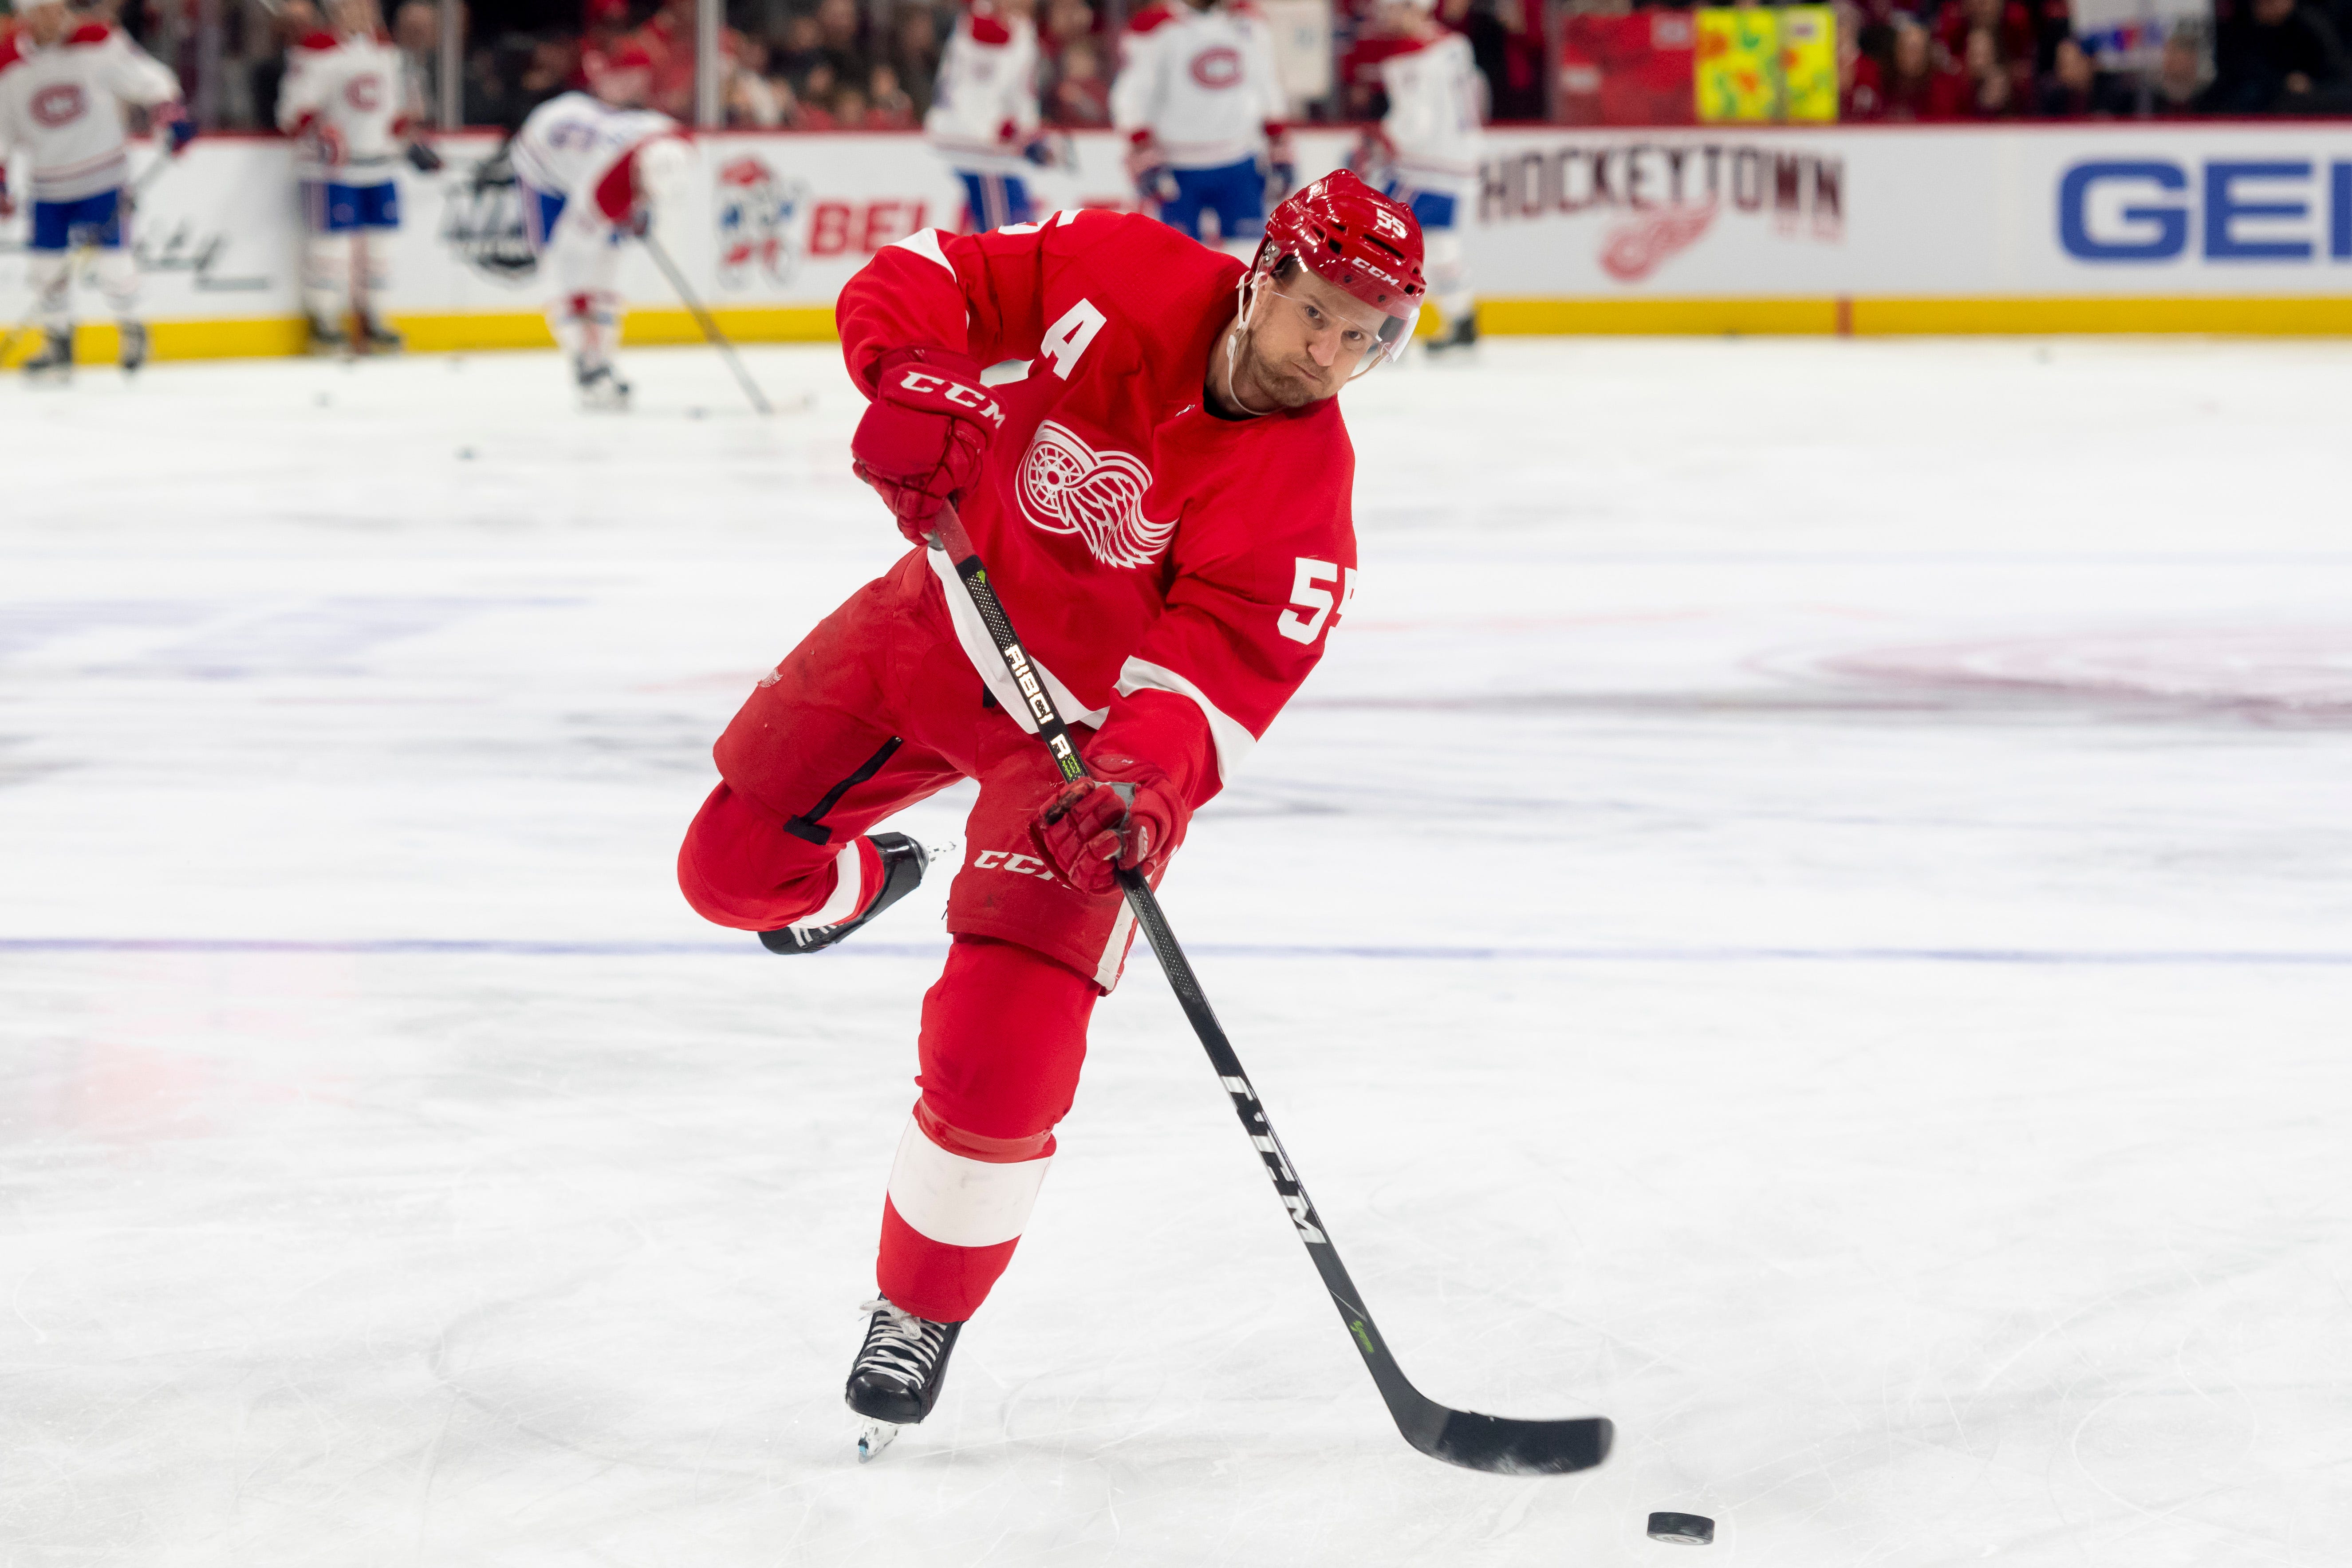 Detroit defenseman Niklas Kronwall shoots the puck during pregame warmups before a game against the Montreal Canadiens at Little Caesars Arena on Feb. 26, 2019.